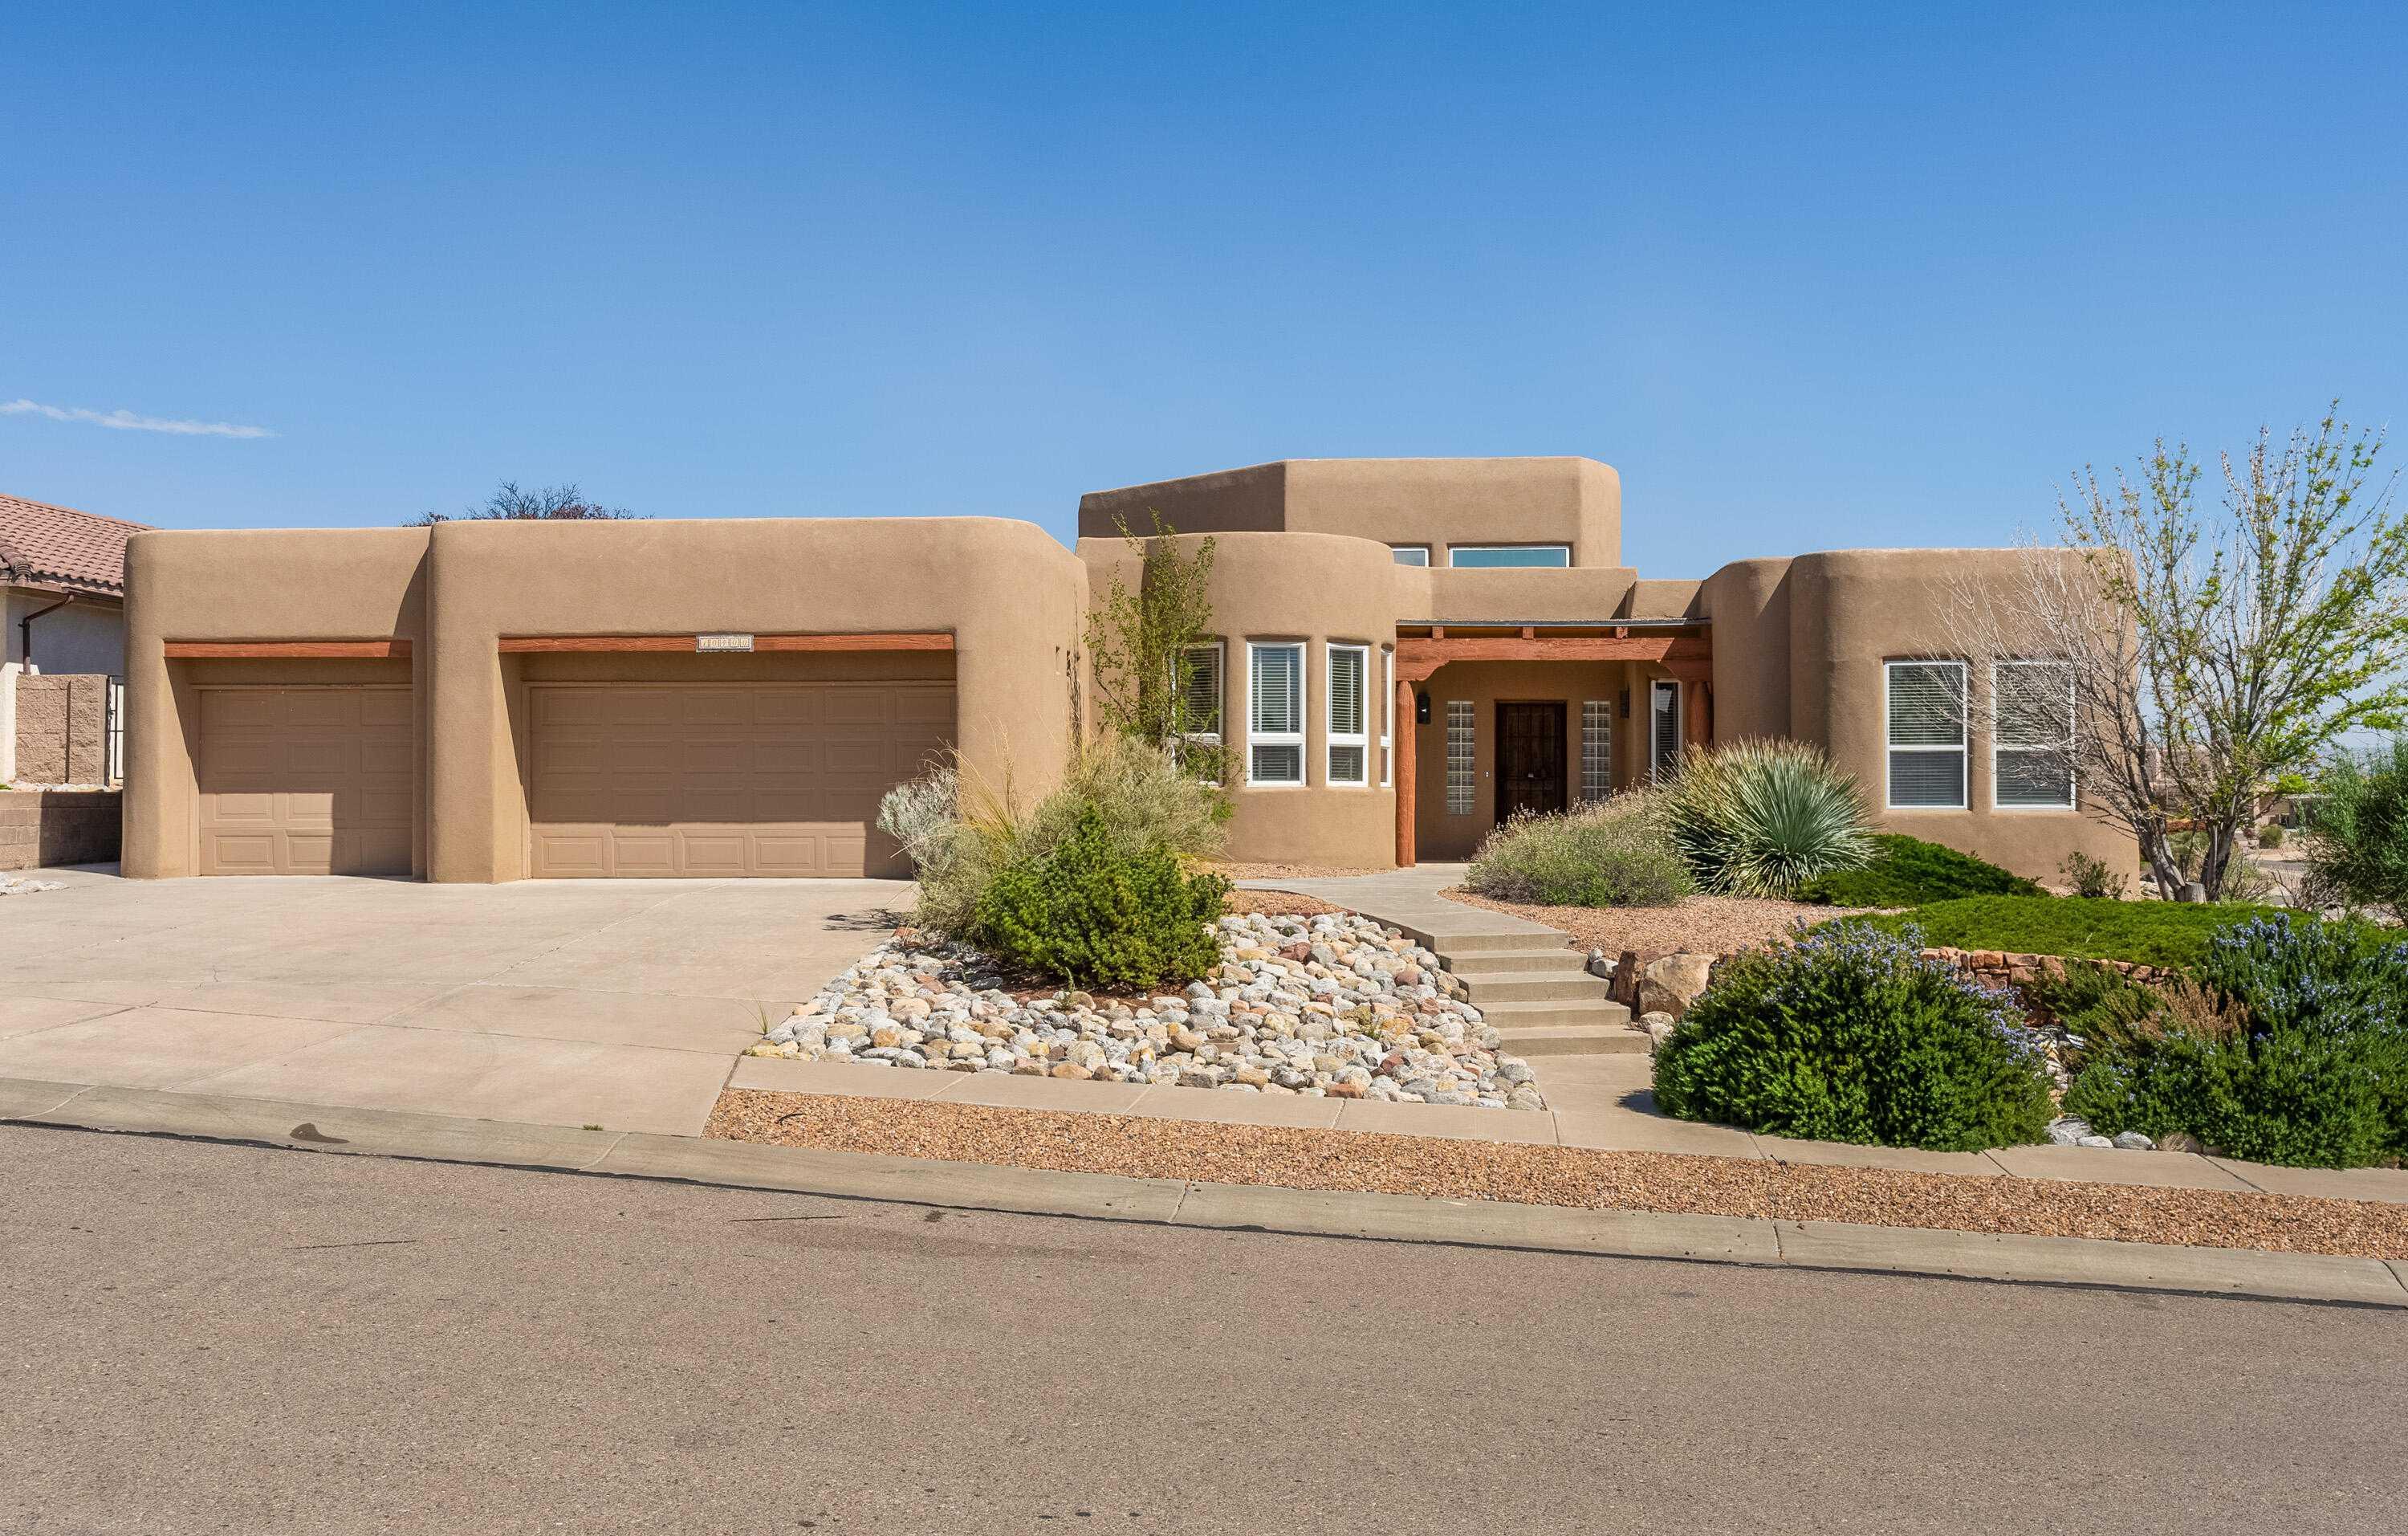 10400 Aventura, 1060834, Albuquerque, Detached,  for sale, Eric Pruitt, Berkshire Hathaway HomeServices New Mexico Properties